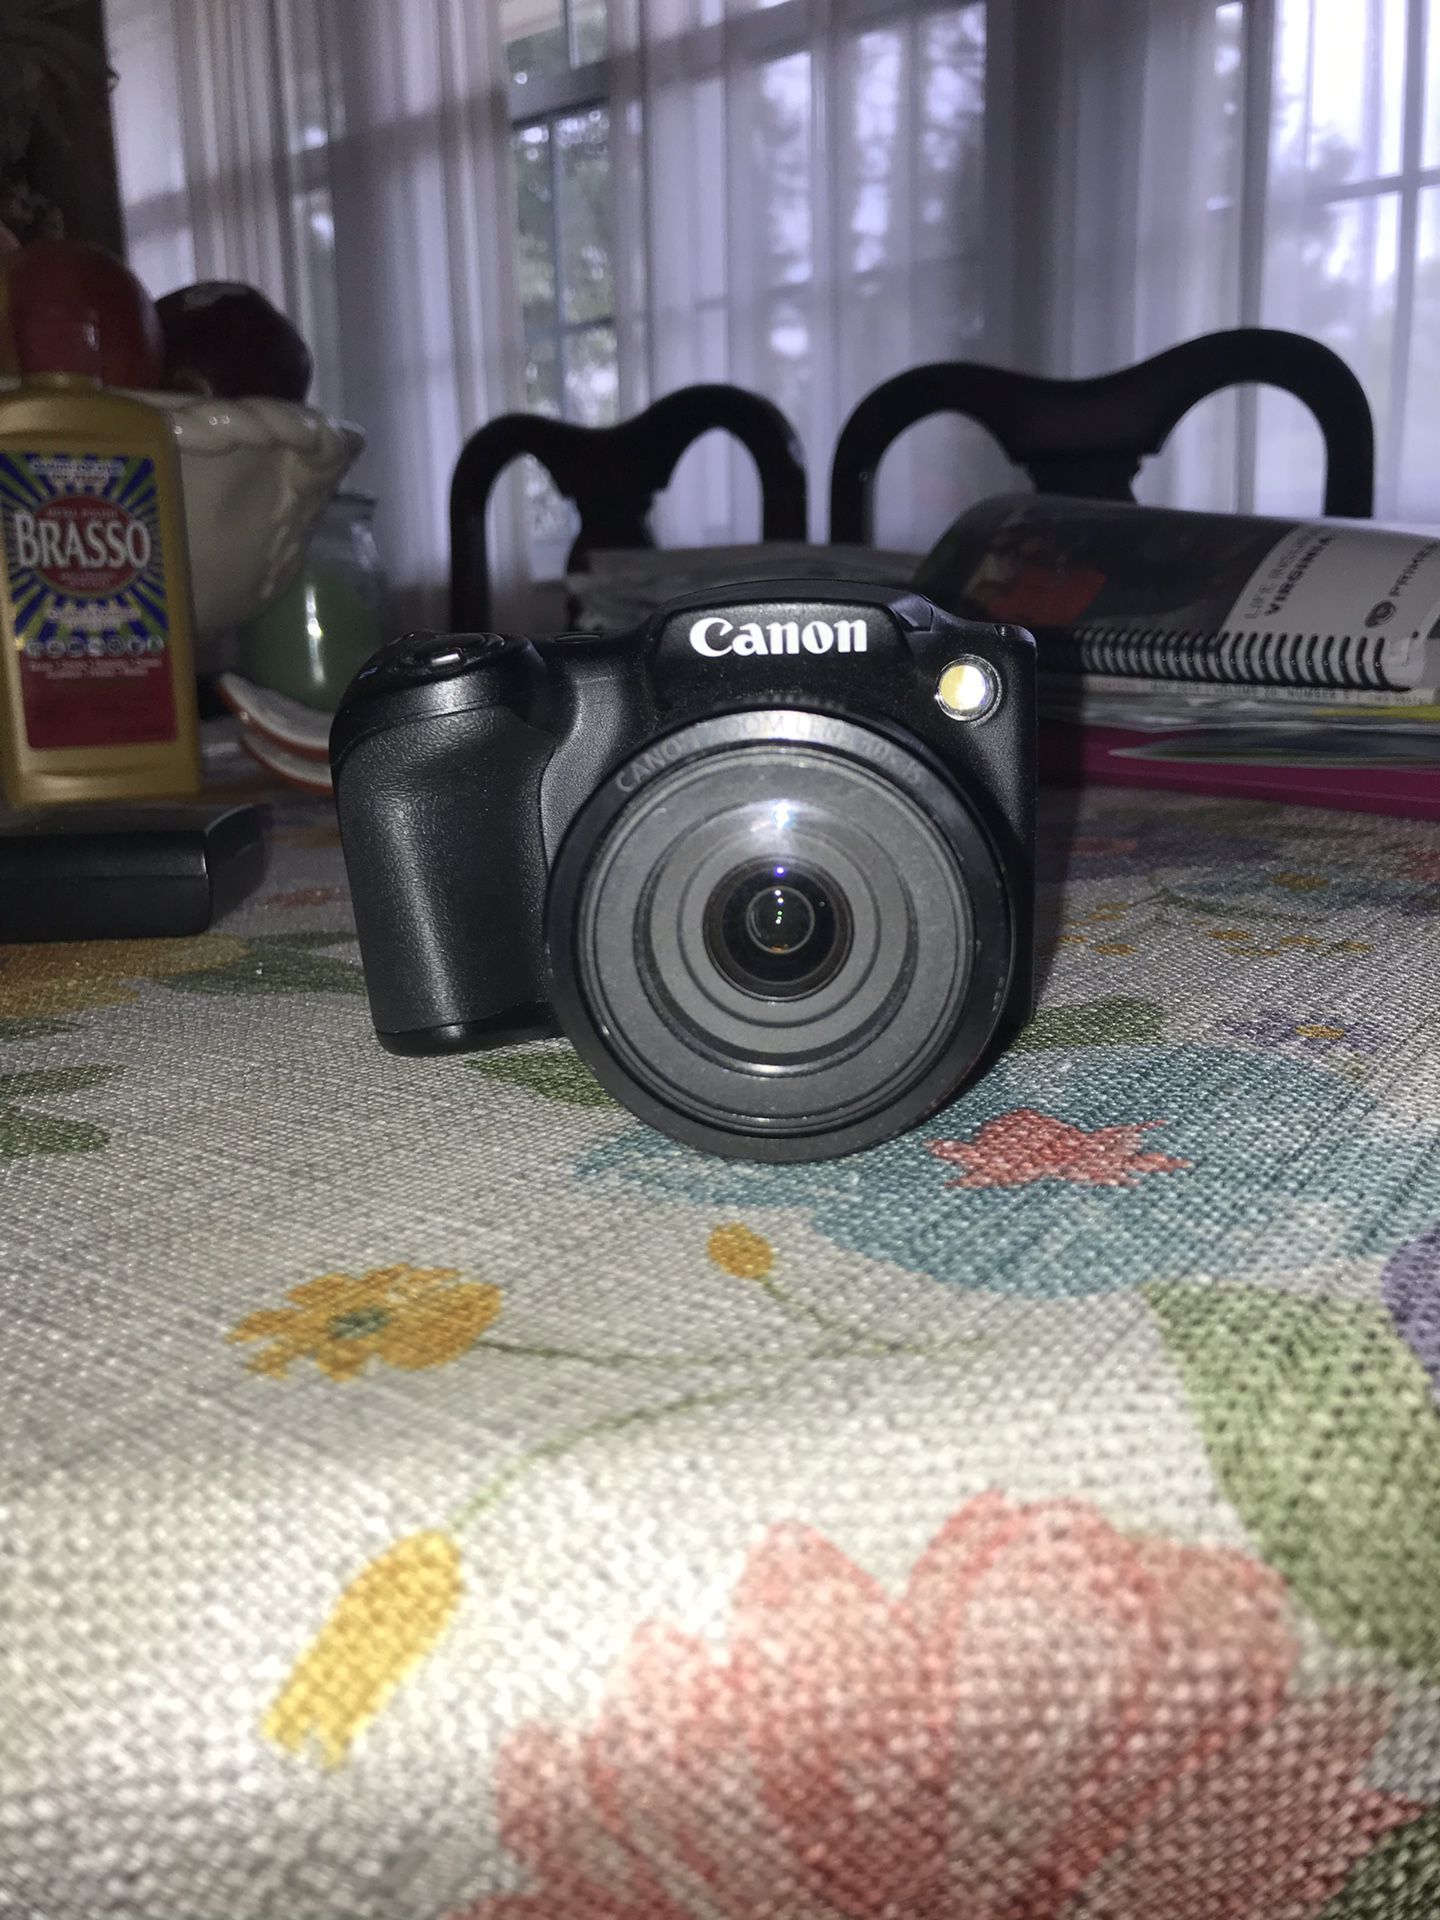 Canon power shot sx410 Is